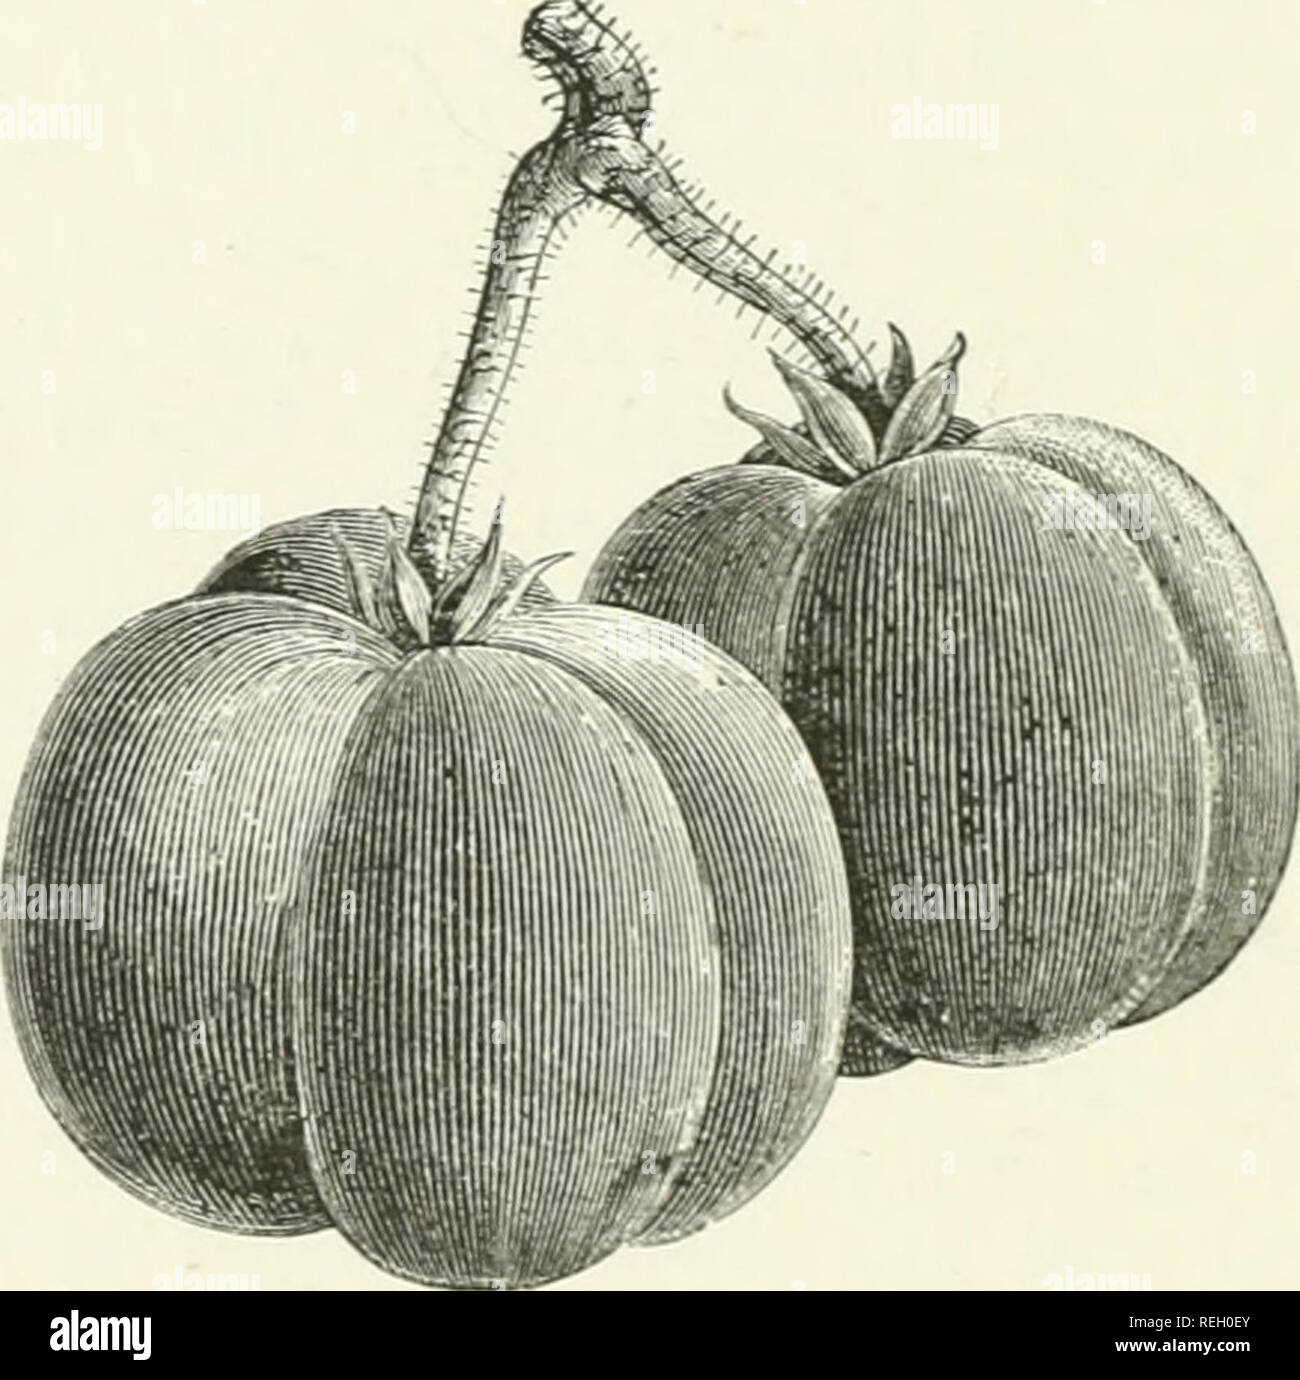 https://c8.alamy.com/comp/REH0EY/commercial-botany-of-the-nineteenth-century-a-record-of-progress-in-the-utilisation-of-vegetable-products-in-the-united-kingdom-and-the-introduction-of-economic-plants-into-the-british-colonies-during-the-present-century-botany-economic-botany-40-commercial-botany-mr-morris-which-shows-the-increased-values-during-the-forty-years-ending-in-1885-1845-1865-1885-apples-oranges-lemons-ampc-158098-1131183-3619788-nuts-almonds-ampc-80682-424866-701910-currants-eaisins-fig3-ampc-648108-1629935-3265s25-886888-3185984-7587523-amongst-home-cul-REH0EY.jpg